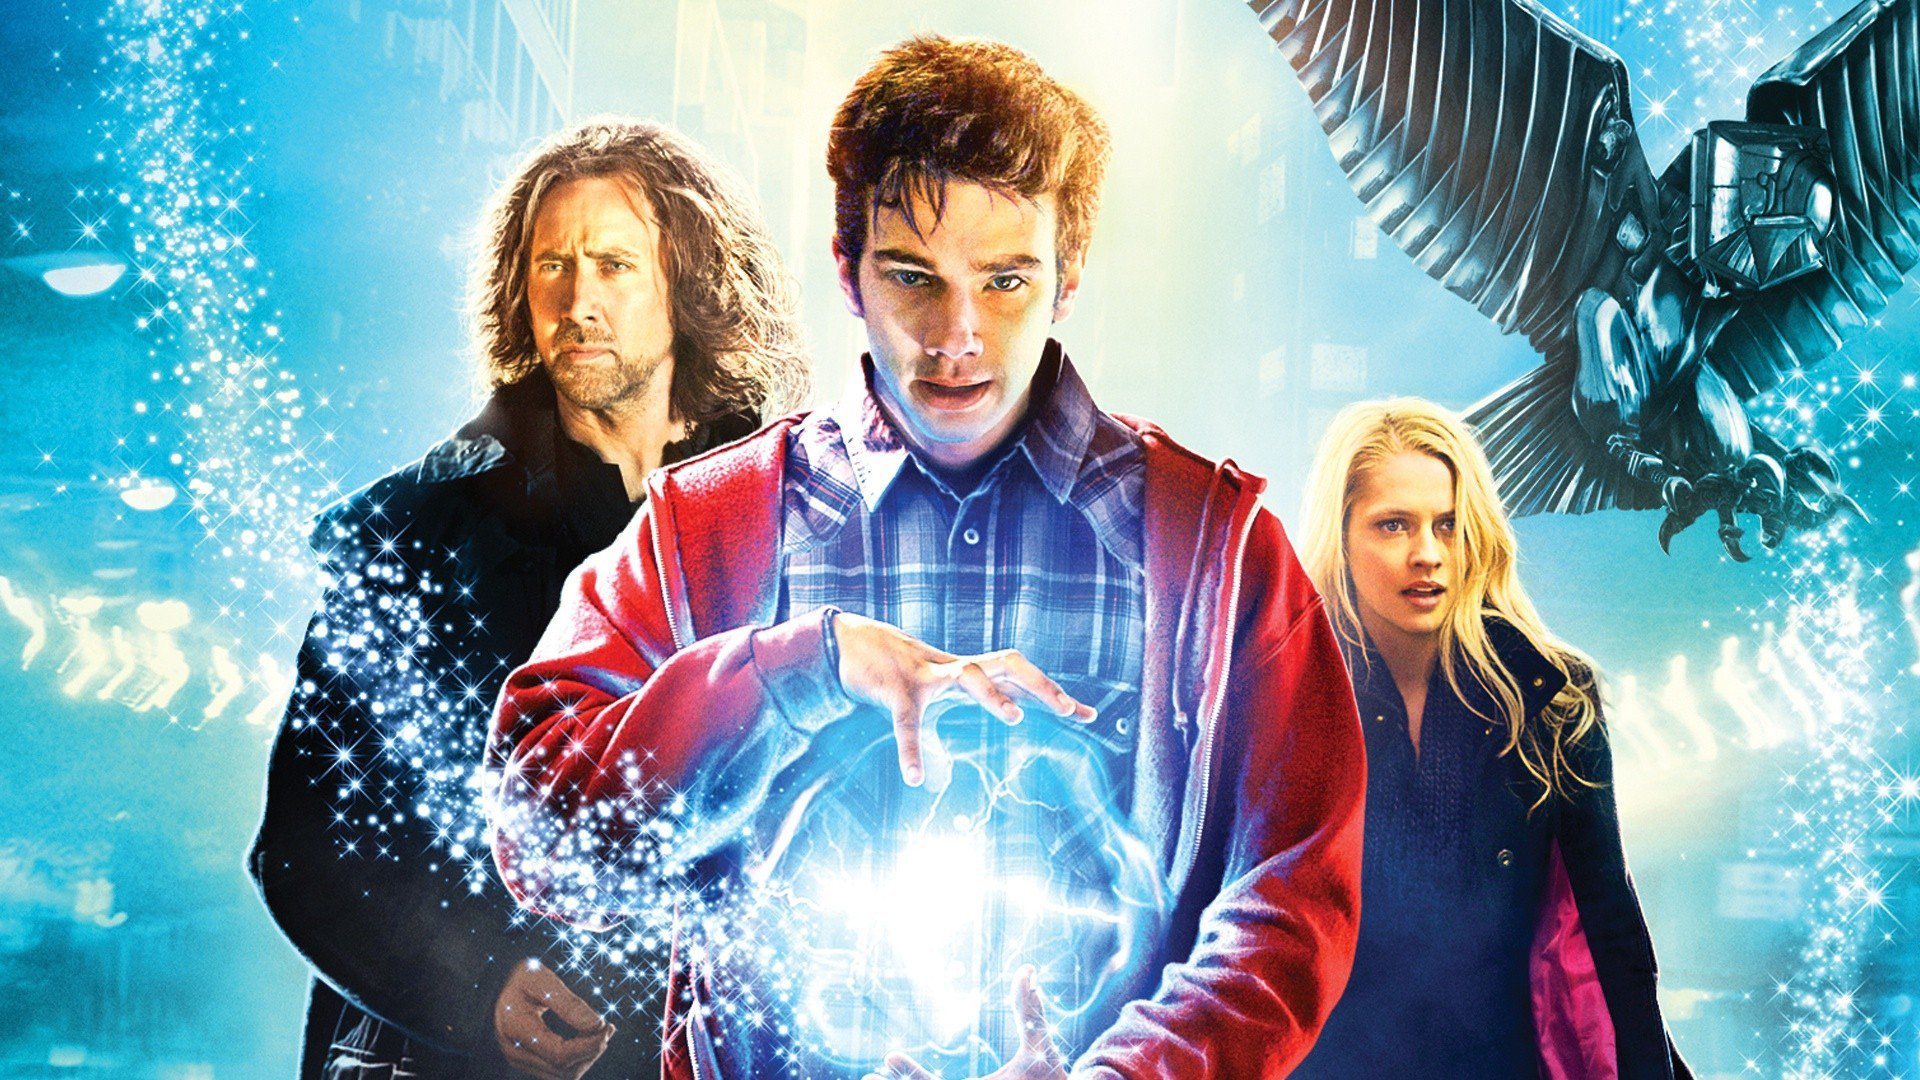 Superhero Movies Of Hollywood: The Sorcerer's Apprentice (2010)